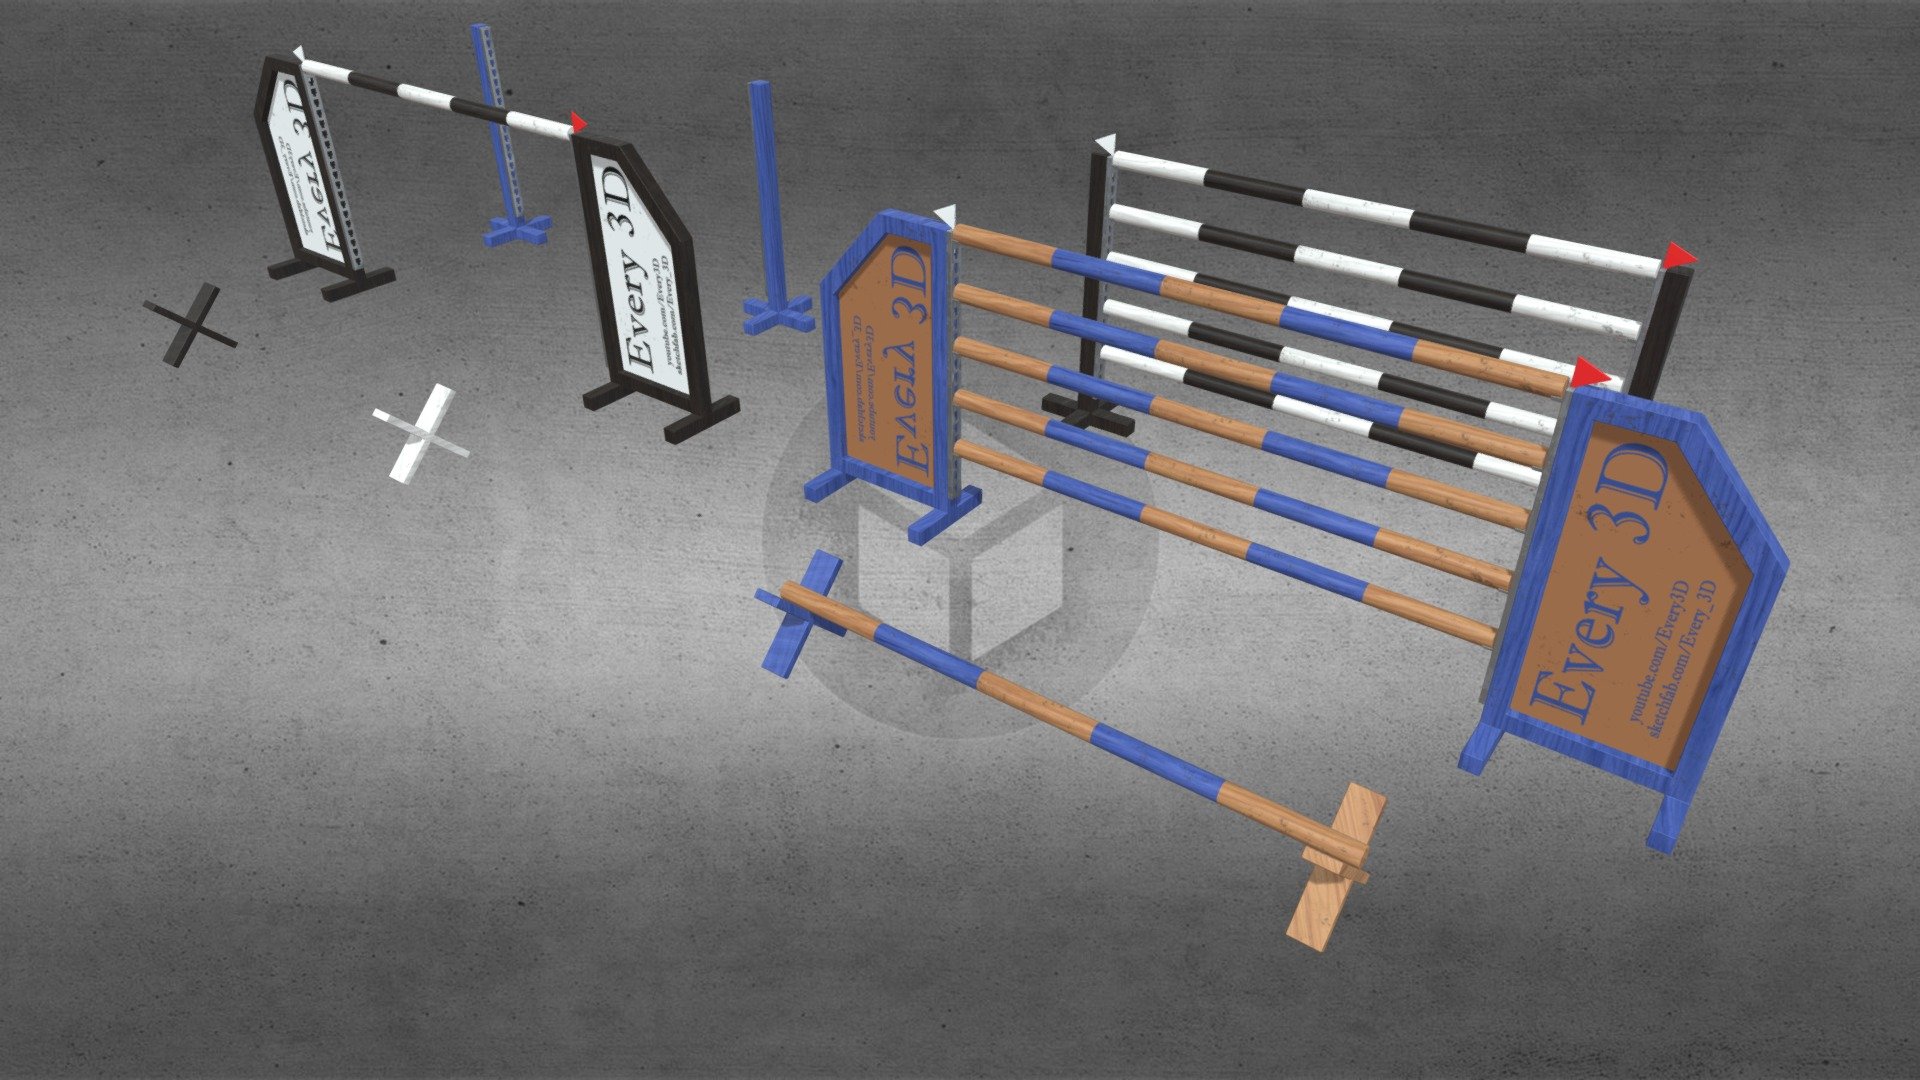 Obstacles for showjumping (Horse jumping). On the right are the assembled obstacles. On the left are show jumping obstacles in the form of a construction set for self-assembly. Stands, poles, holders for poles, cavaletti &ldquo;Cross